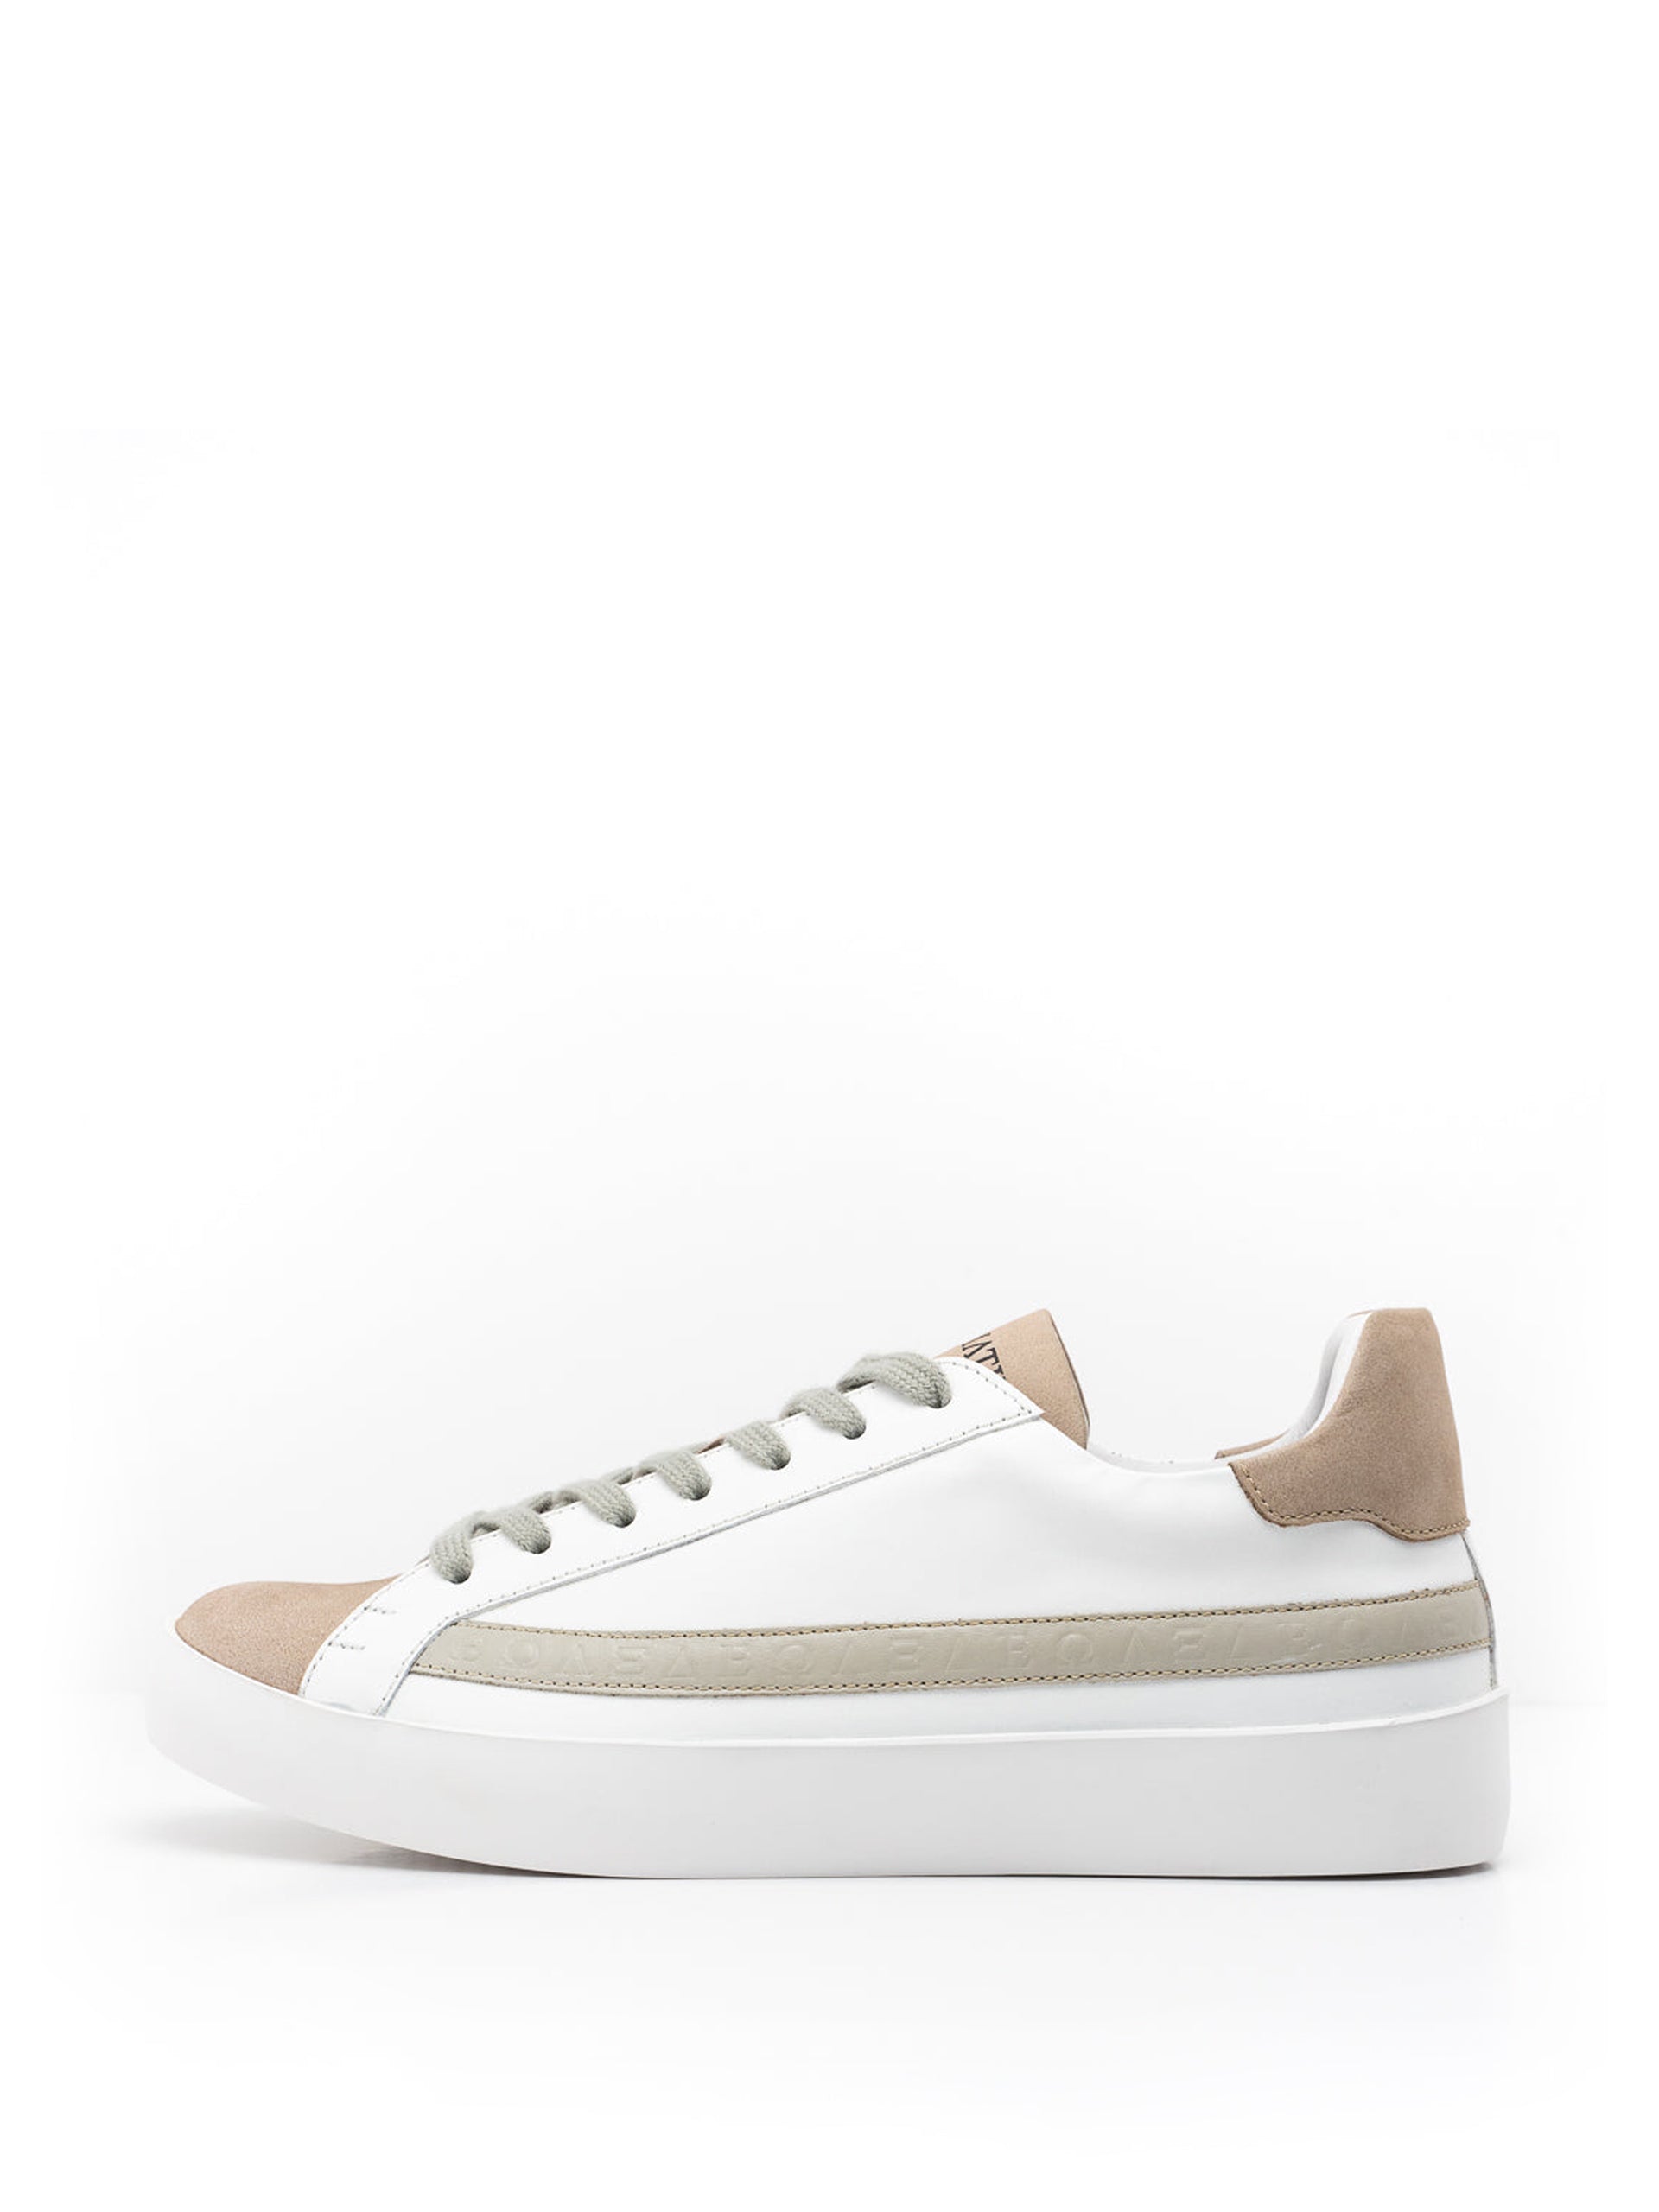 The Lorcan white and beige women's trainers - Collagerie